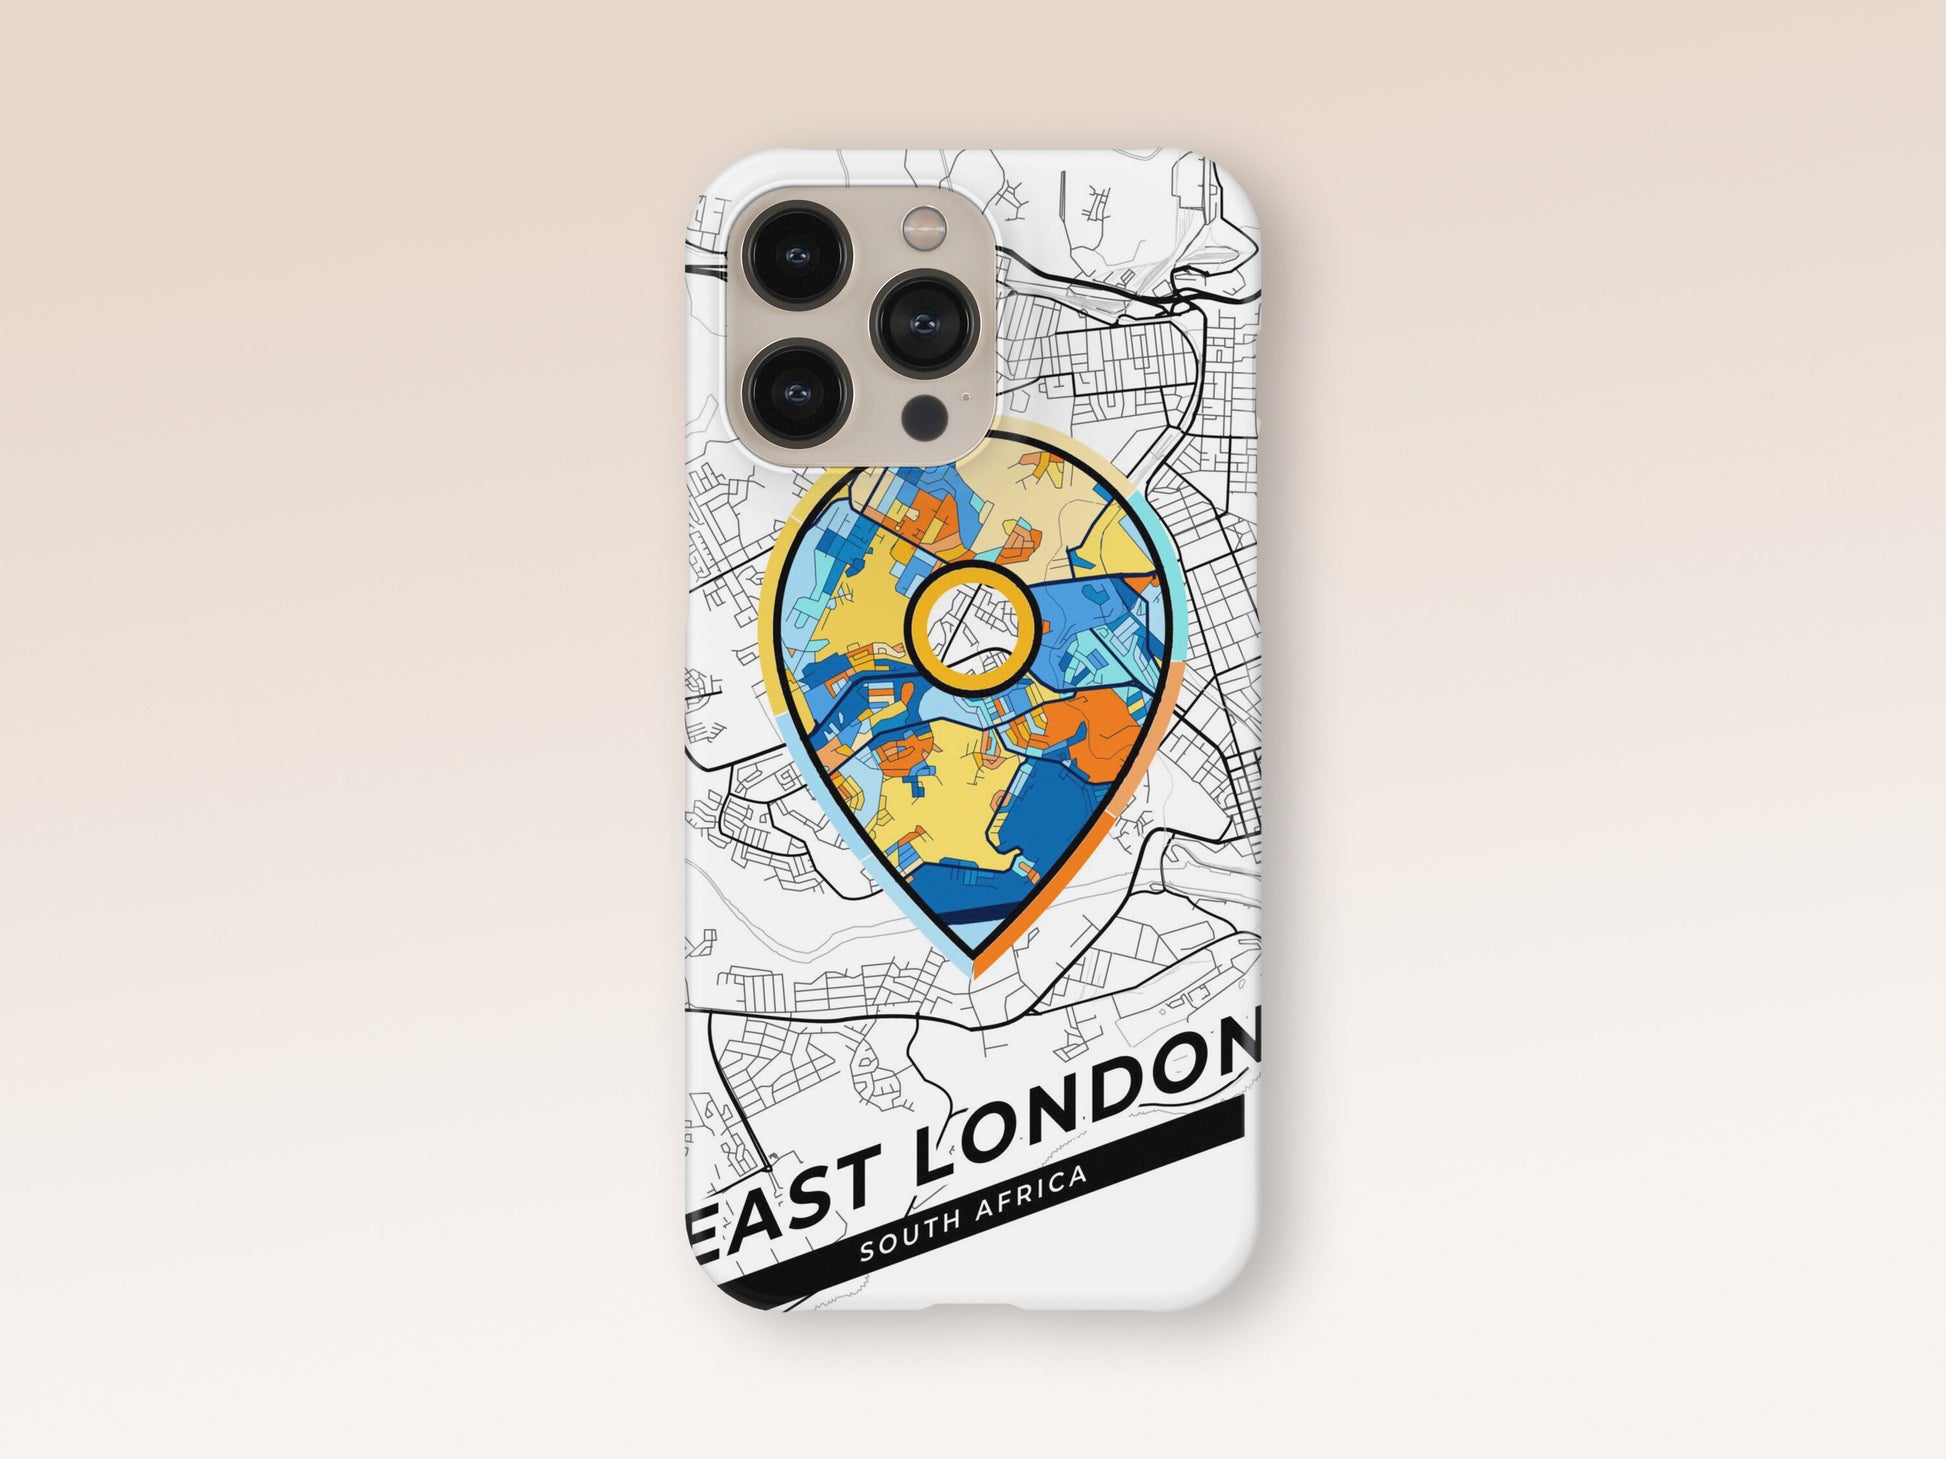 East London South Africa slim phone case with colorful icon. Birthday, wedding or housewarming gift. Couple match cases. 1